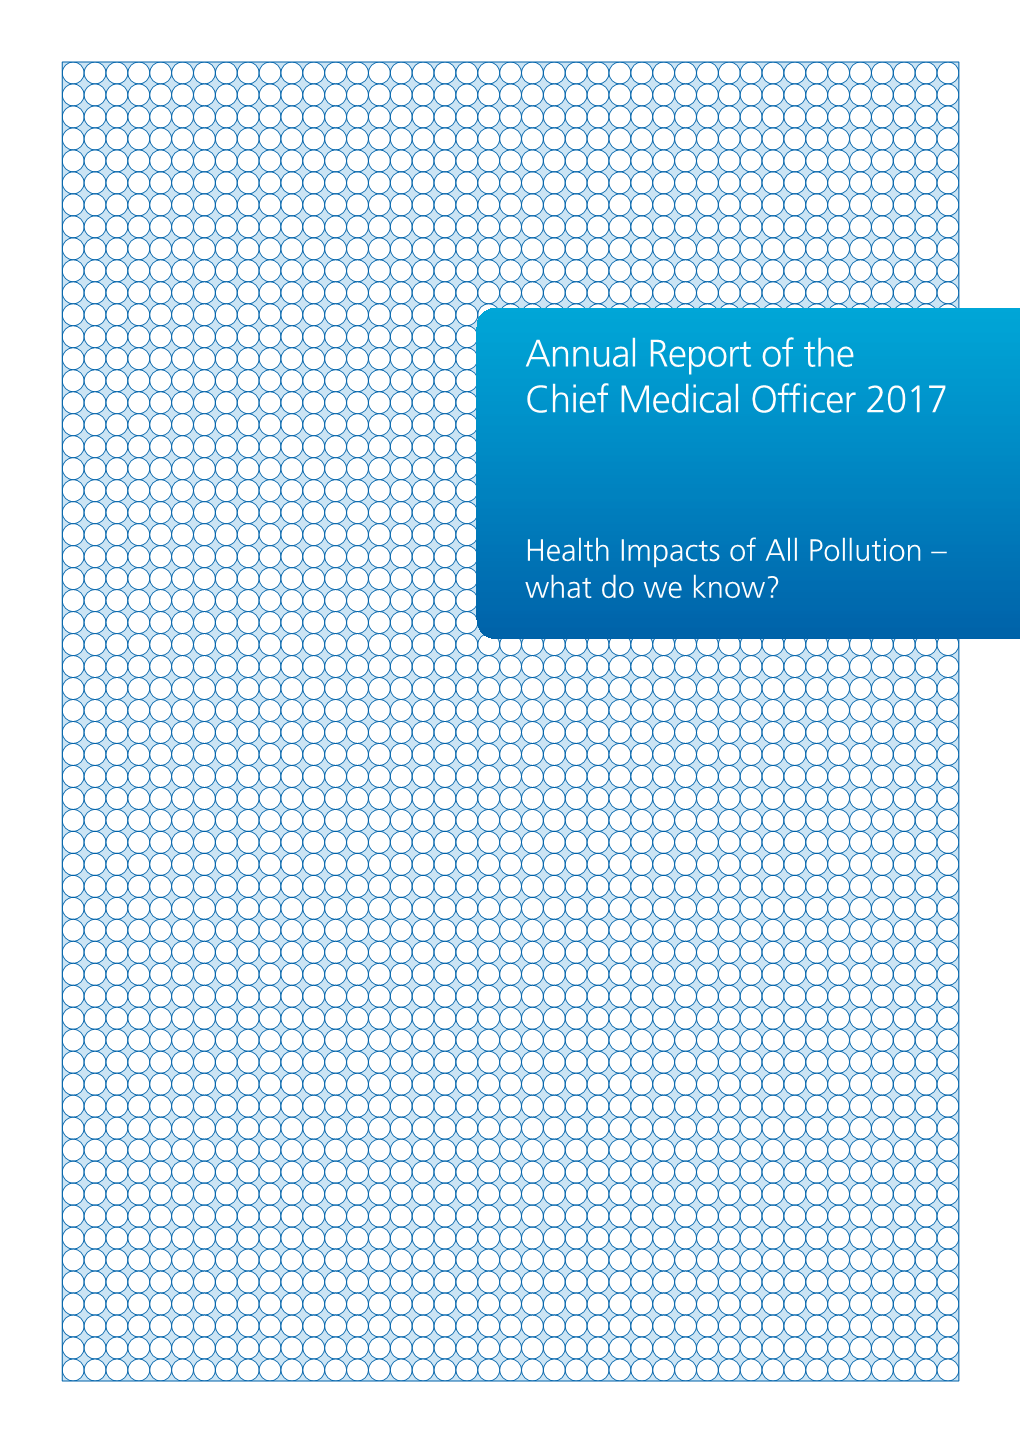 Annual Report of the Chief Medical Officer 2017 Medical Officer 2017 Officer Medical